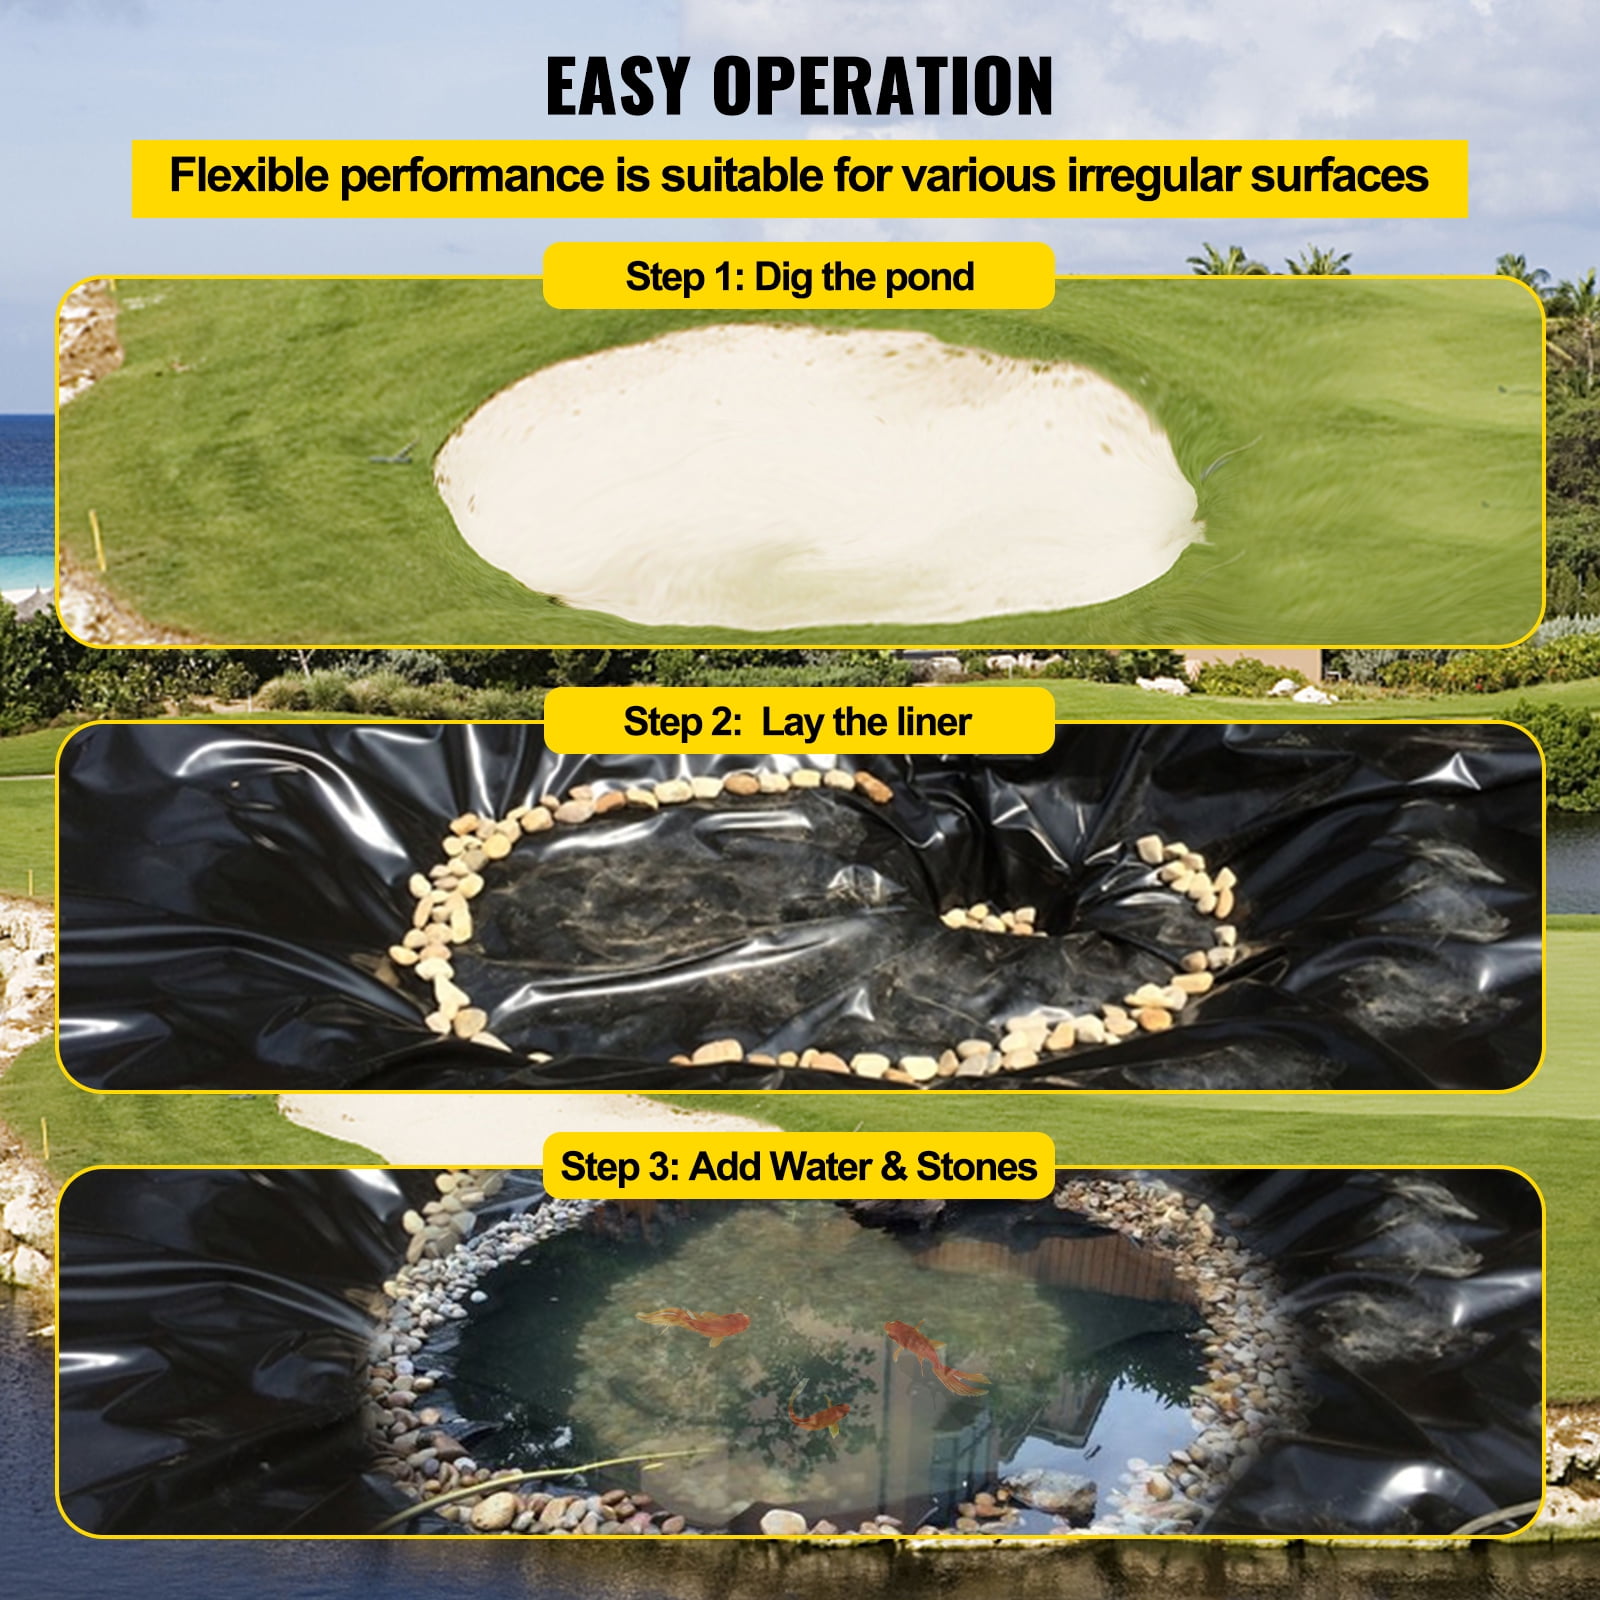 YZprism Pond Liners LLDPE 25 x 20 FT 20 Mils Softer More Flexible Waterfall Pond Fish Ponds Black Pond Liner Duck Large Water Garden Pond Tarp Liner Fabric Liner for Pond Features Fountain Seals 